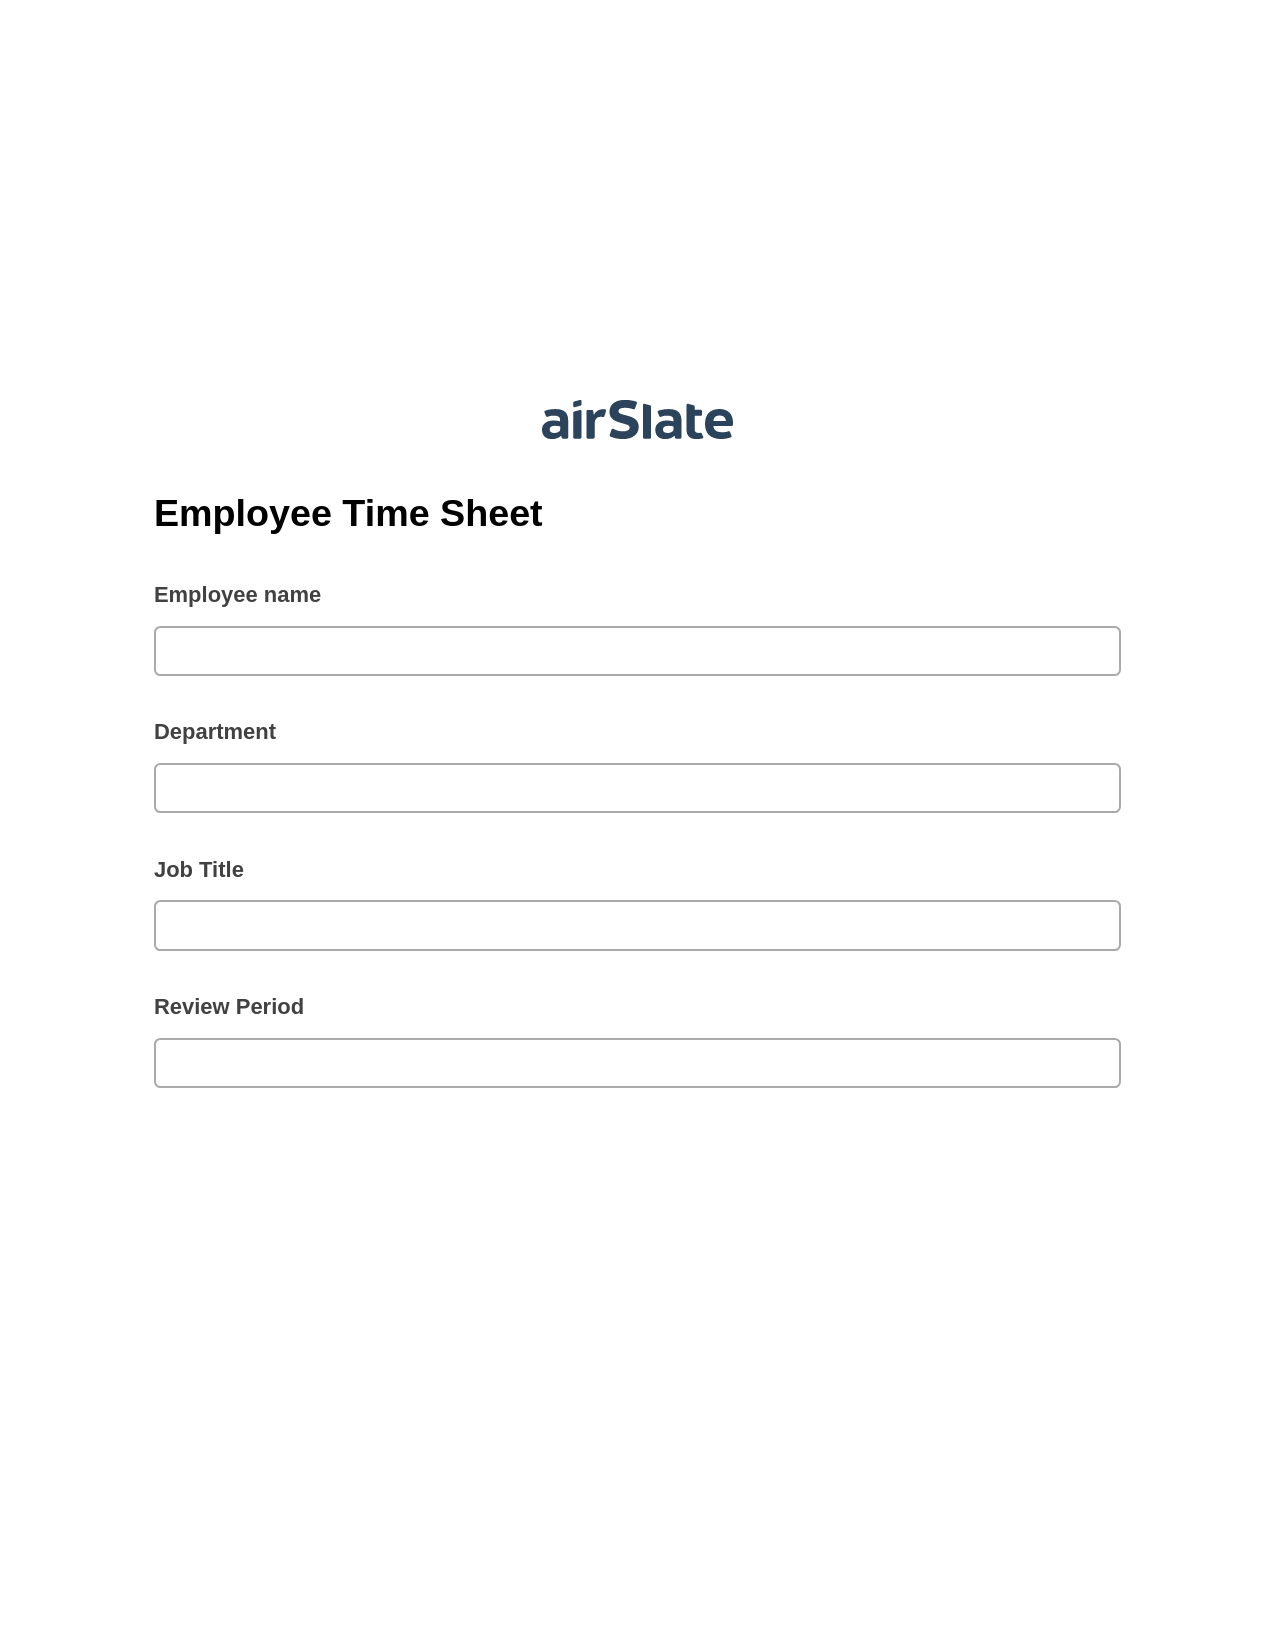 Multirole Employee Time Sheet Pre-fill from Office 365 Excel Bot, Update Audit Trail Bot, Export to Google Sheet Bot